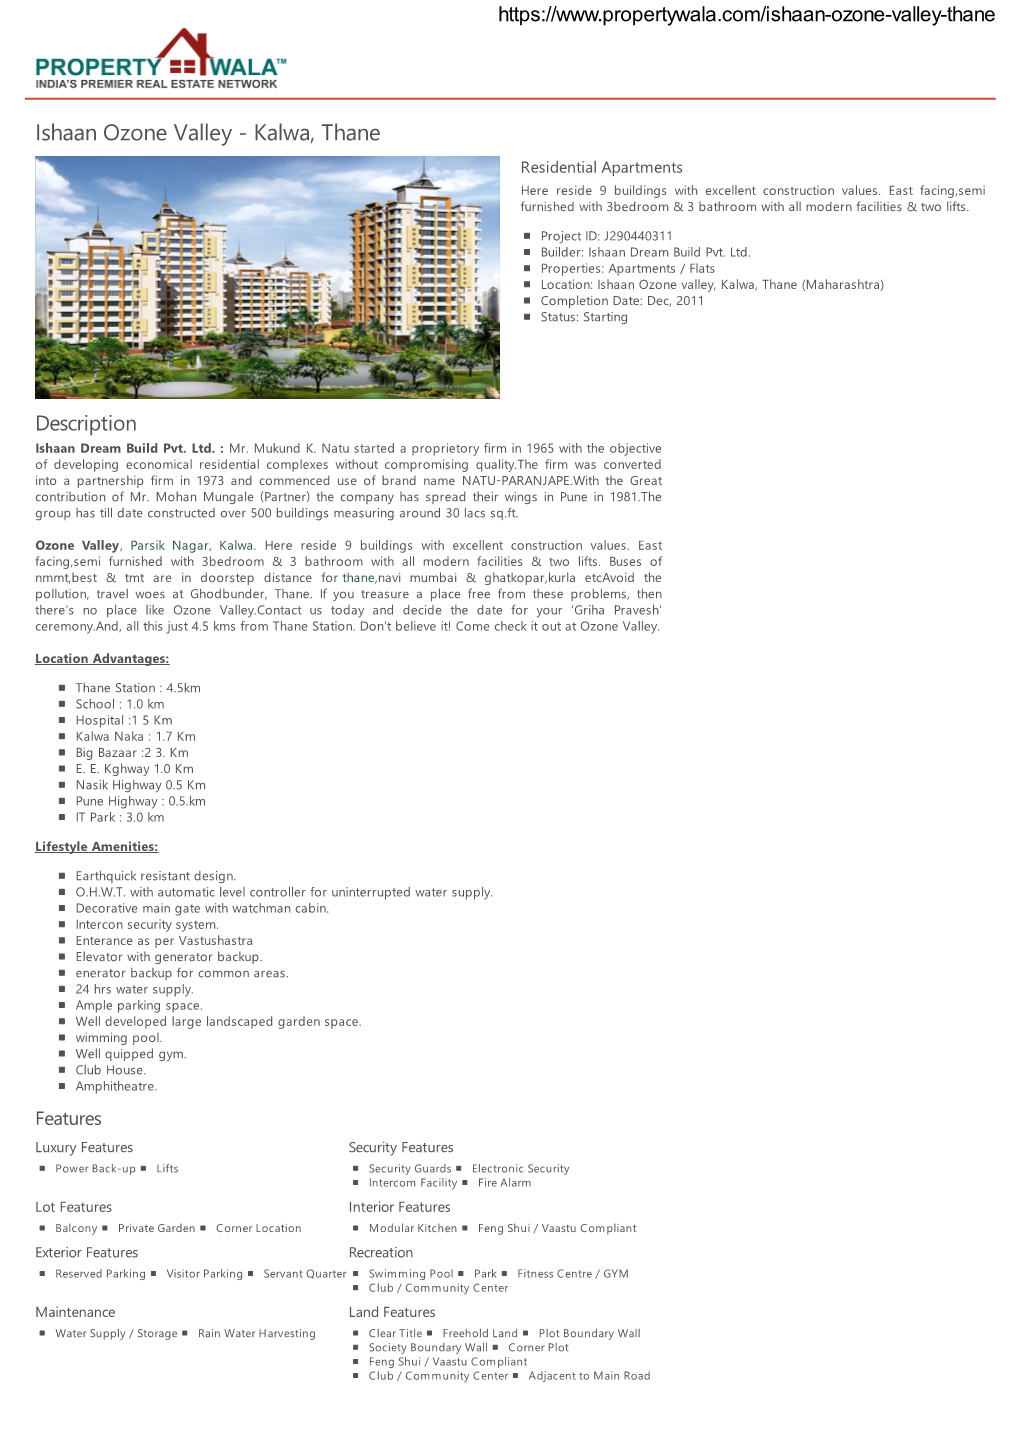 Ishaan Ozone Valley - Kalwa, Thane Residential Apartments Here Reside 9 Buildings with Excellent Construction Values